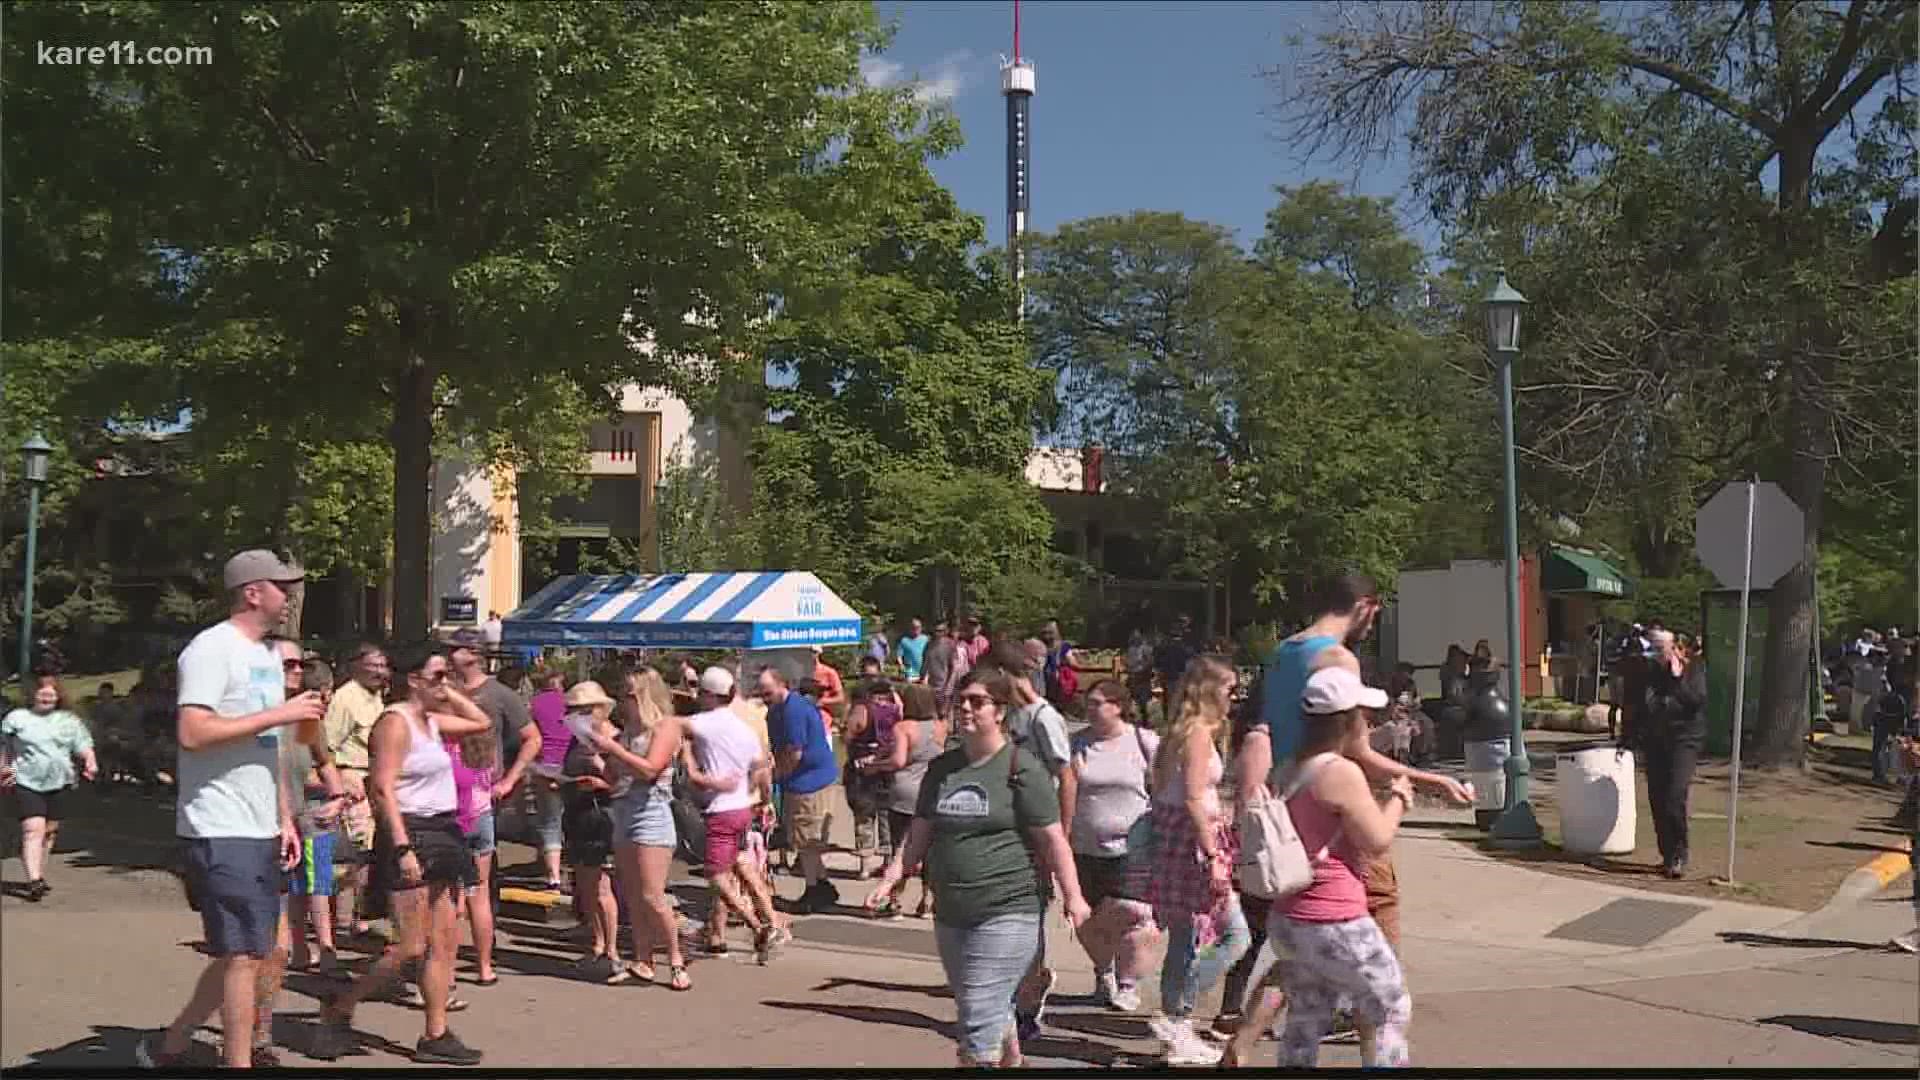 Fair organizers say they lost $1.3 million on last summer's get together.